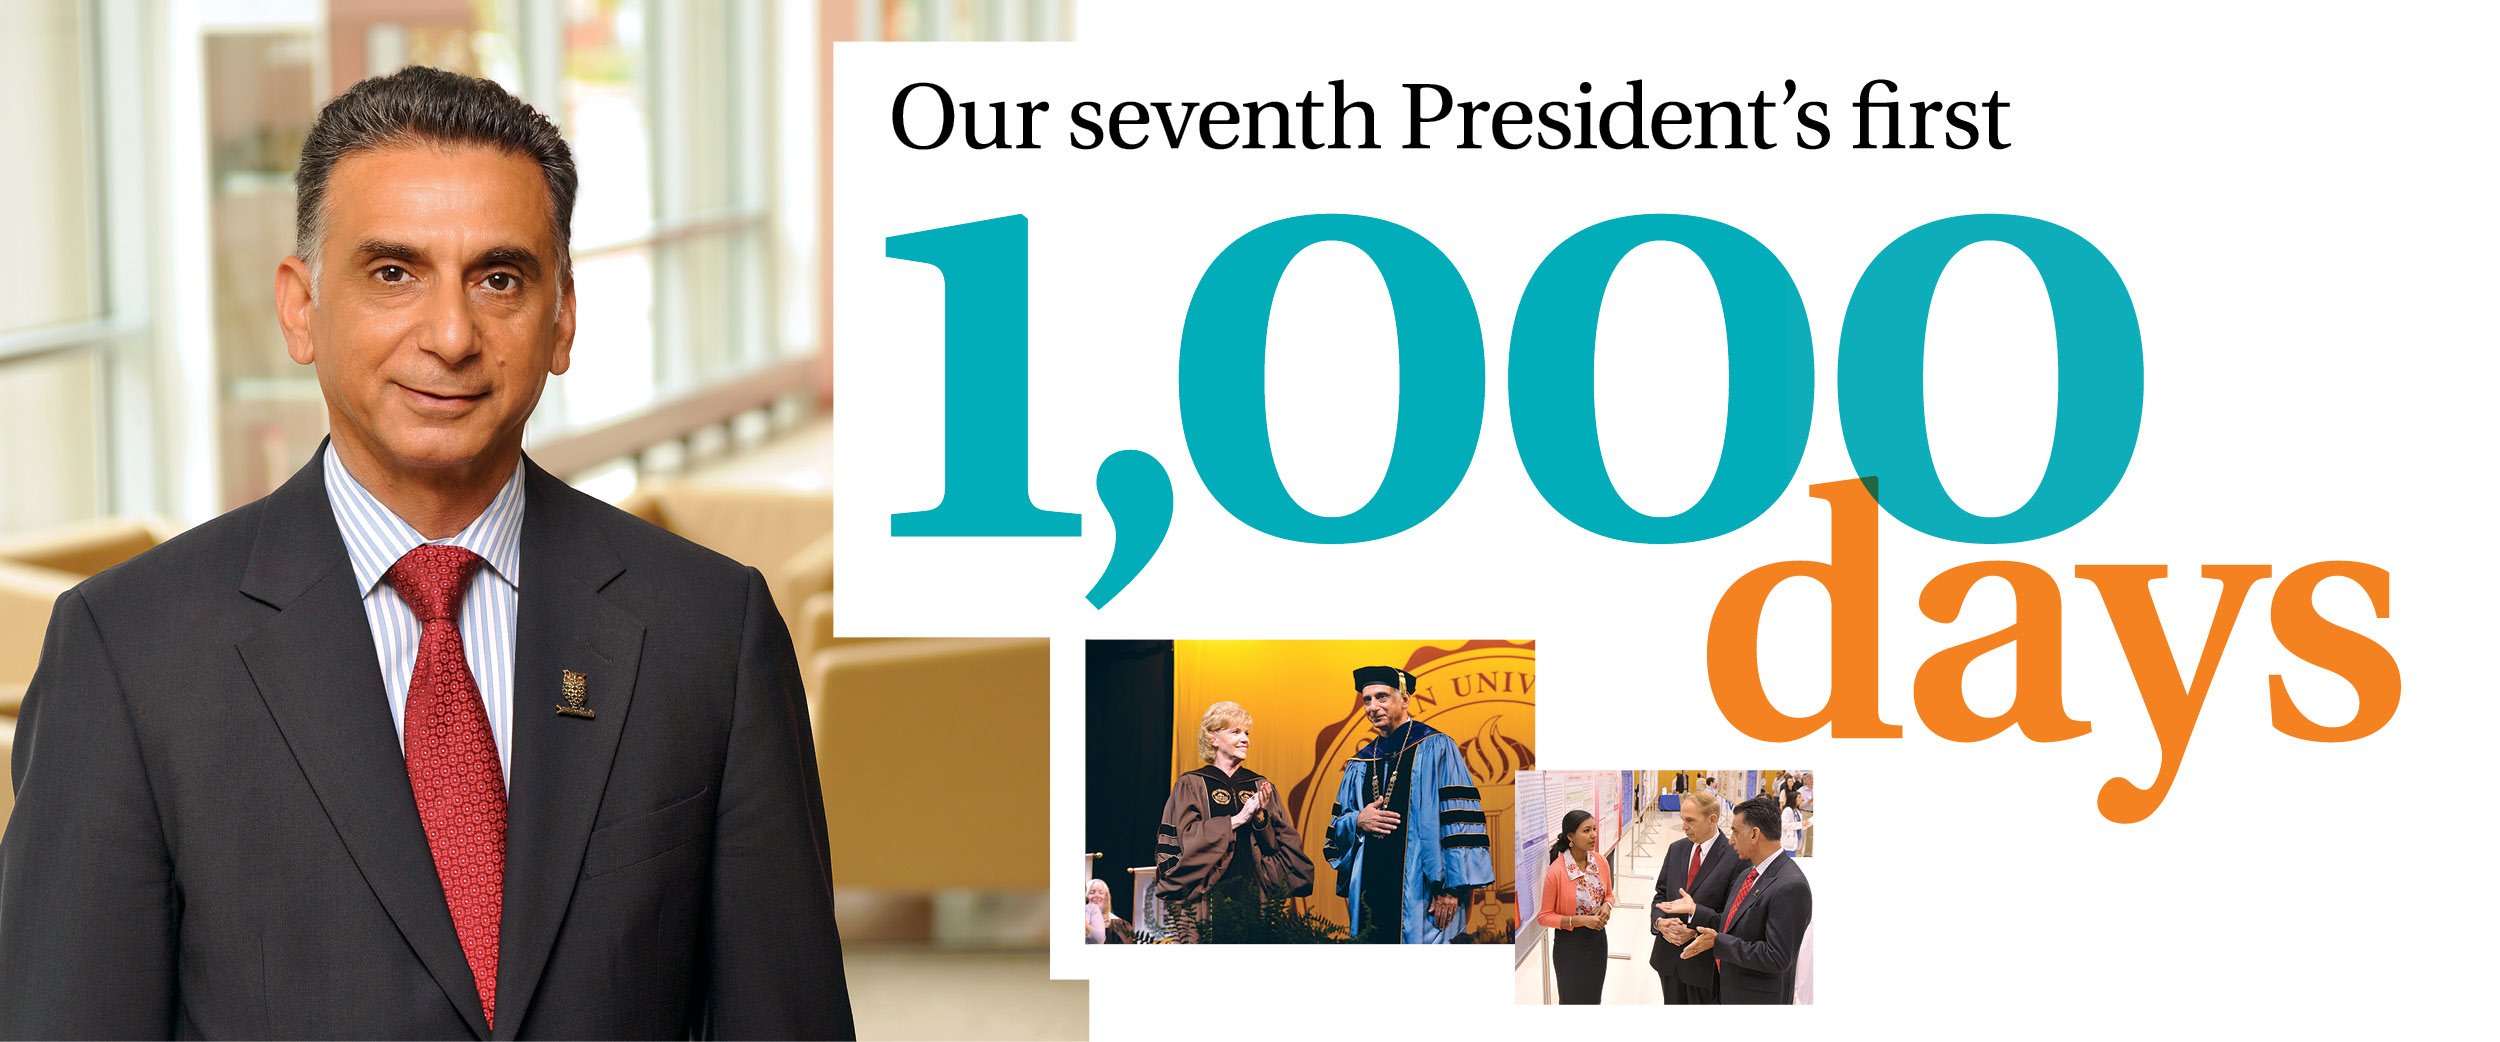 Our seventh President's first 1,000 days